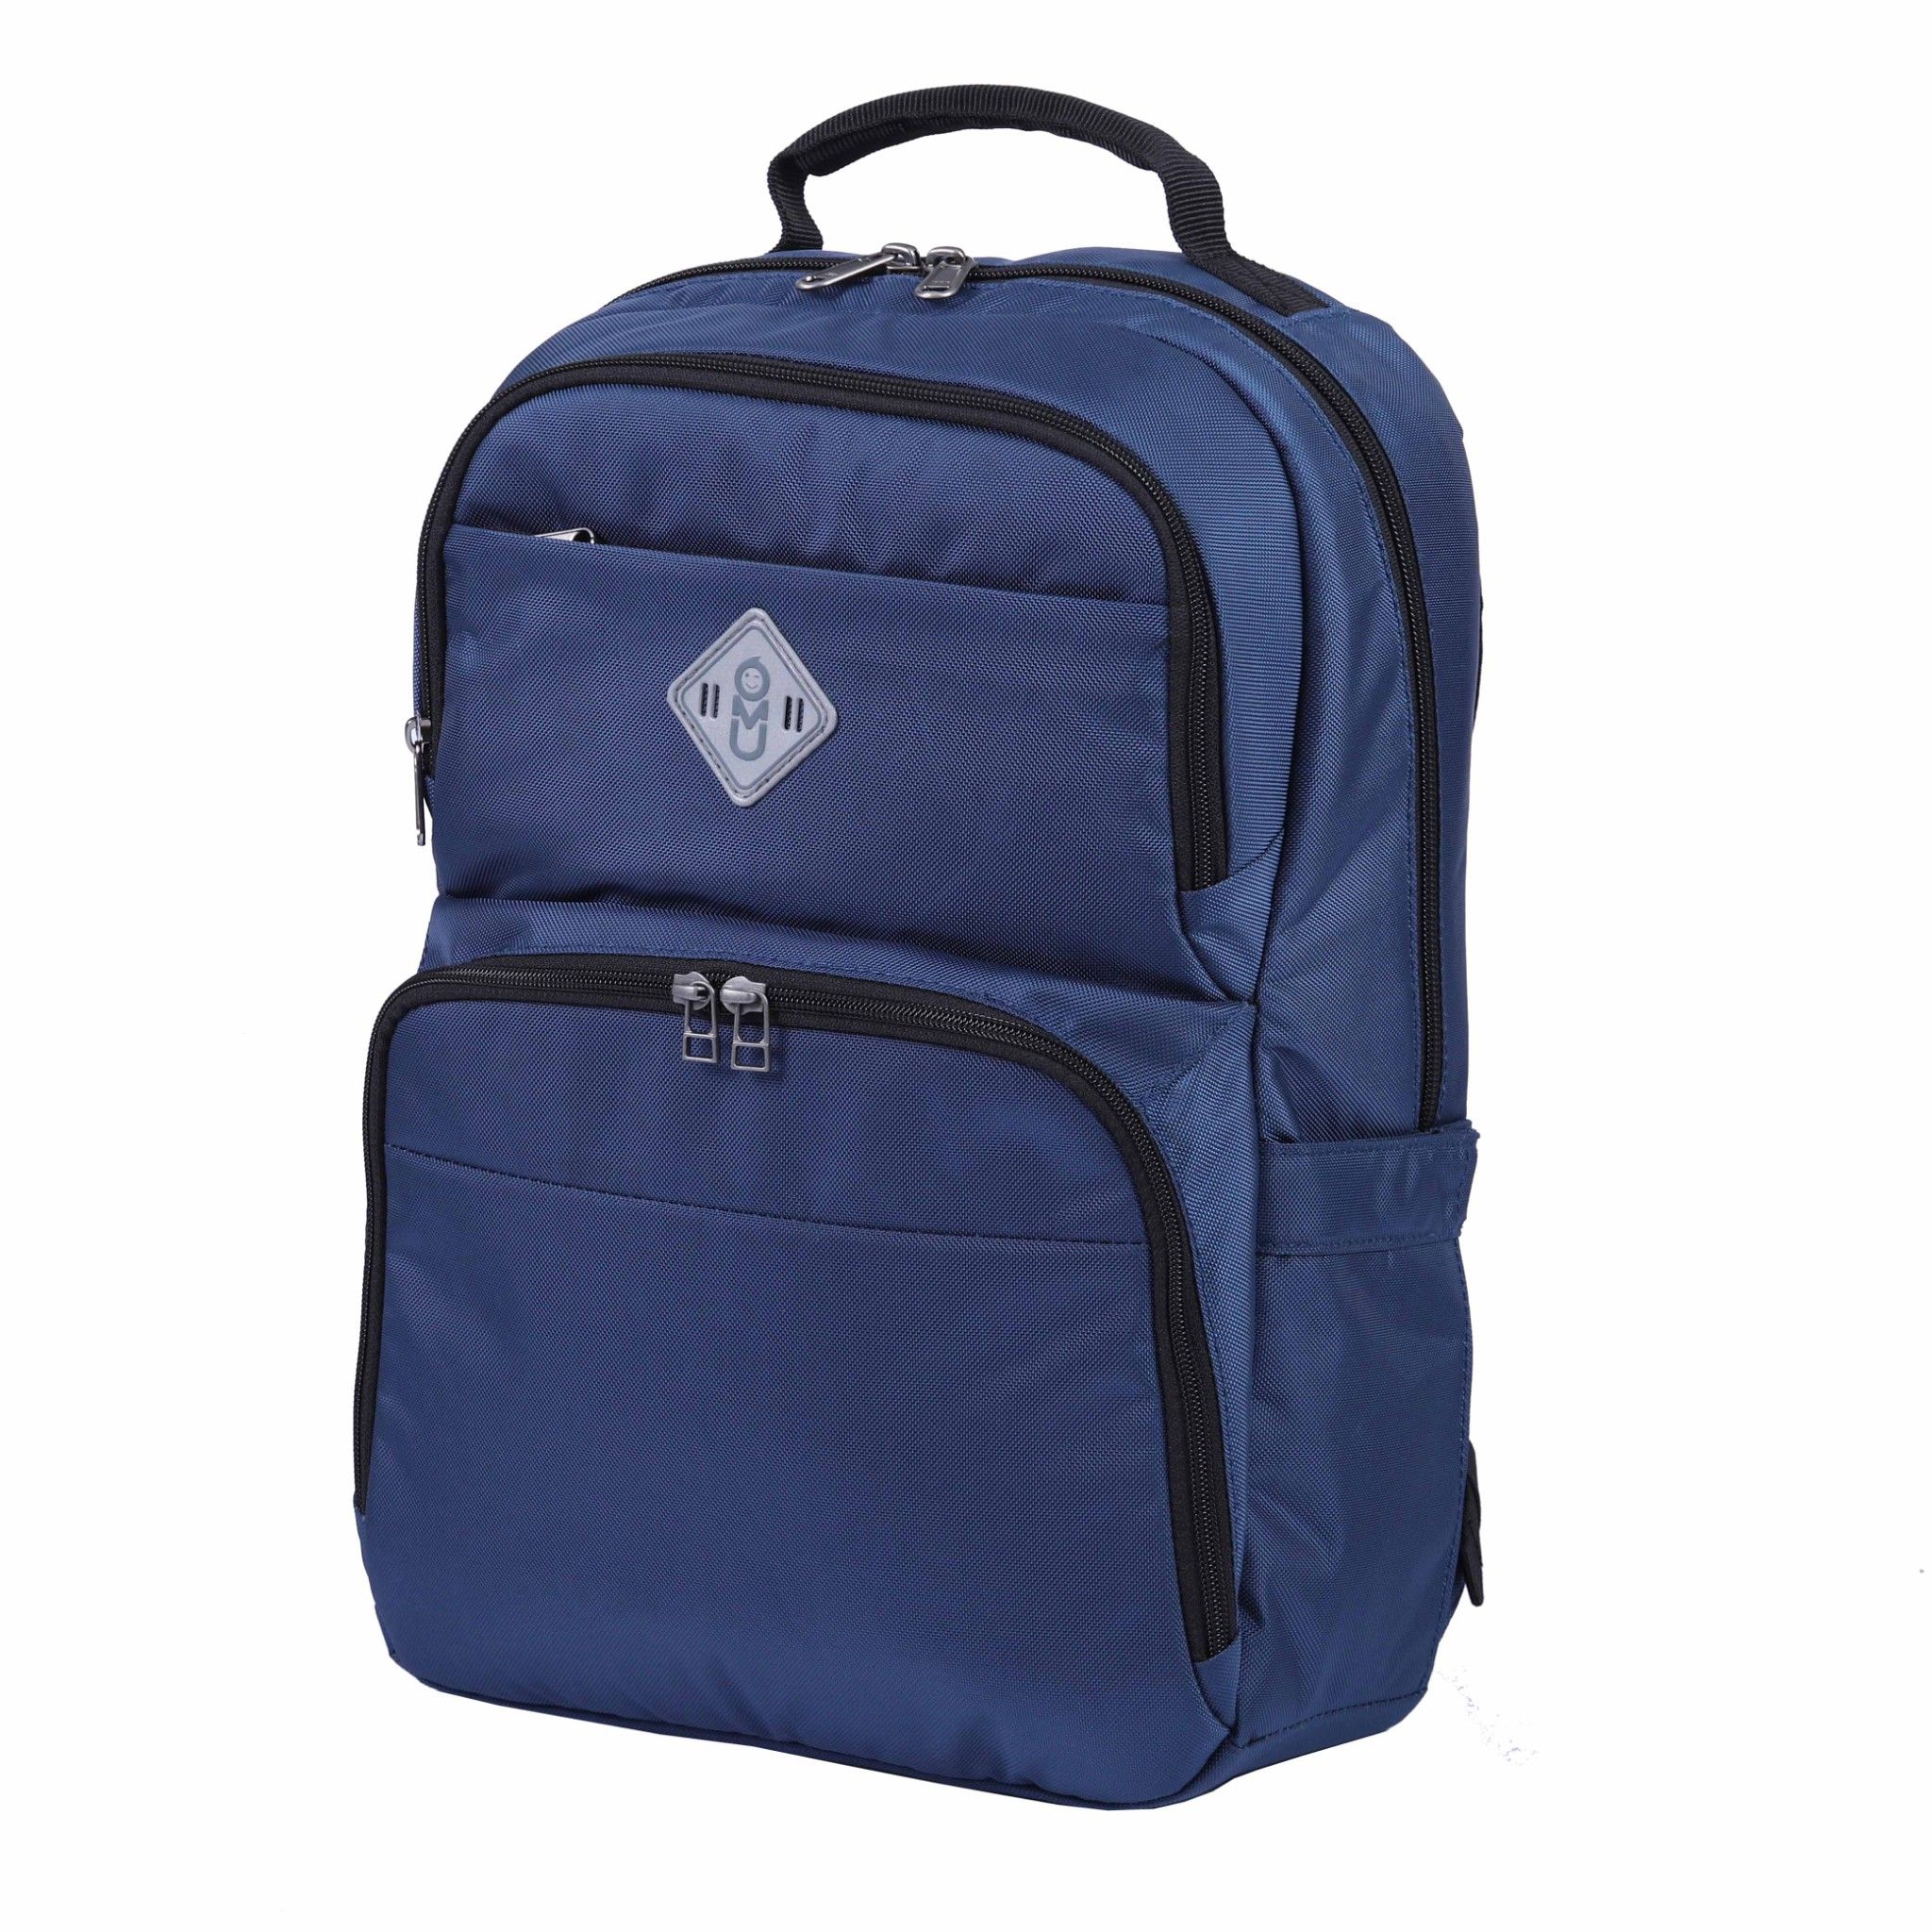  UMO DYNAMIC BackPack Navy- Balo Laptop Cao Cấp 